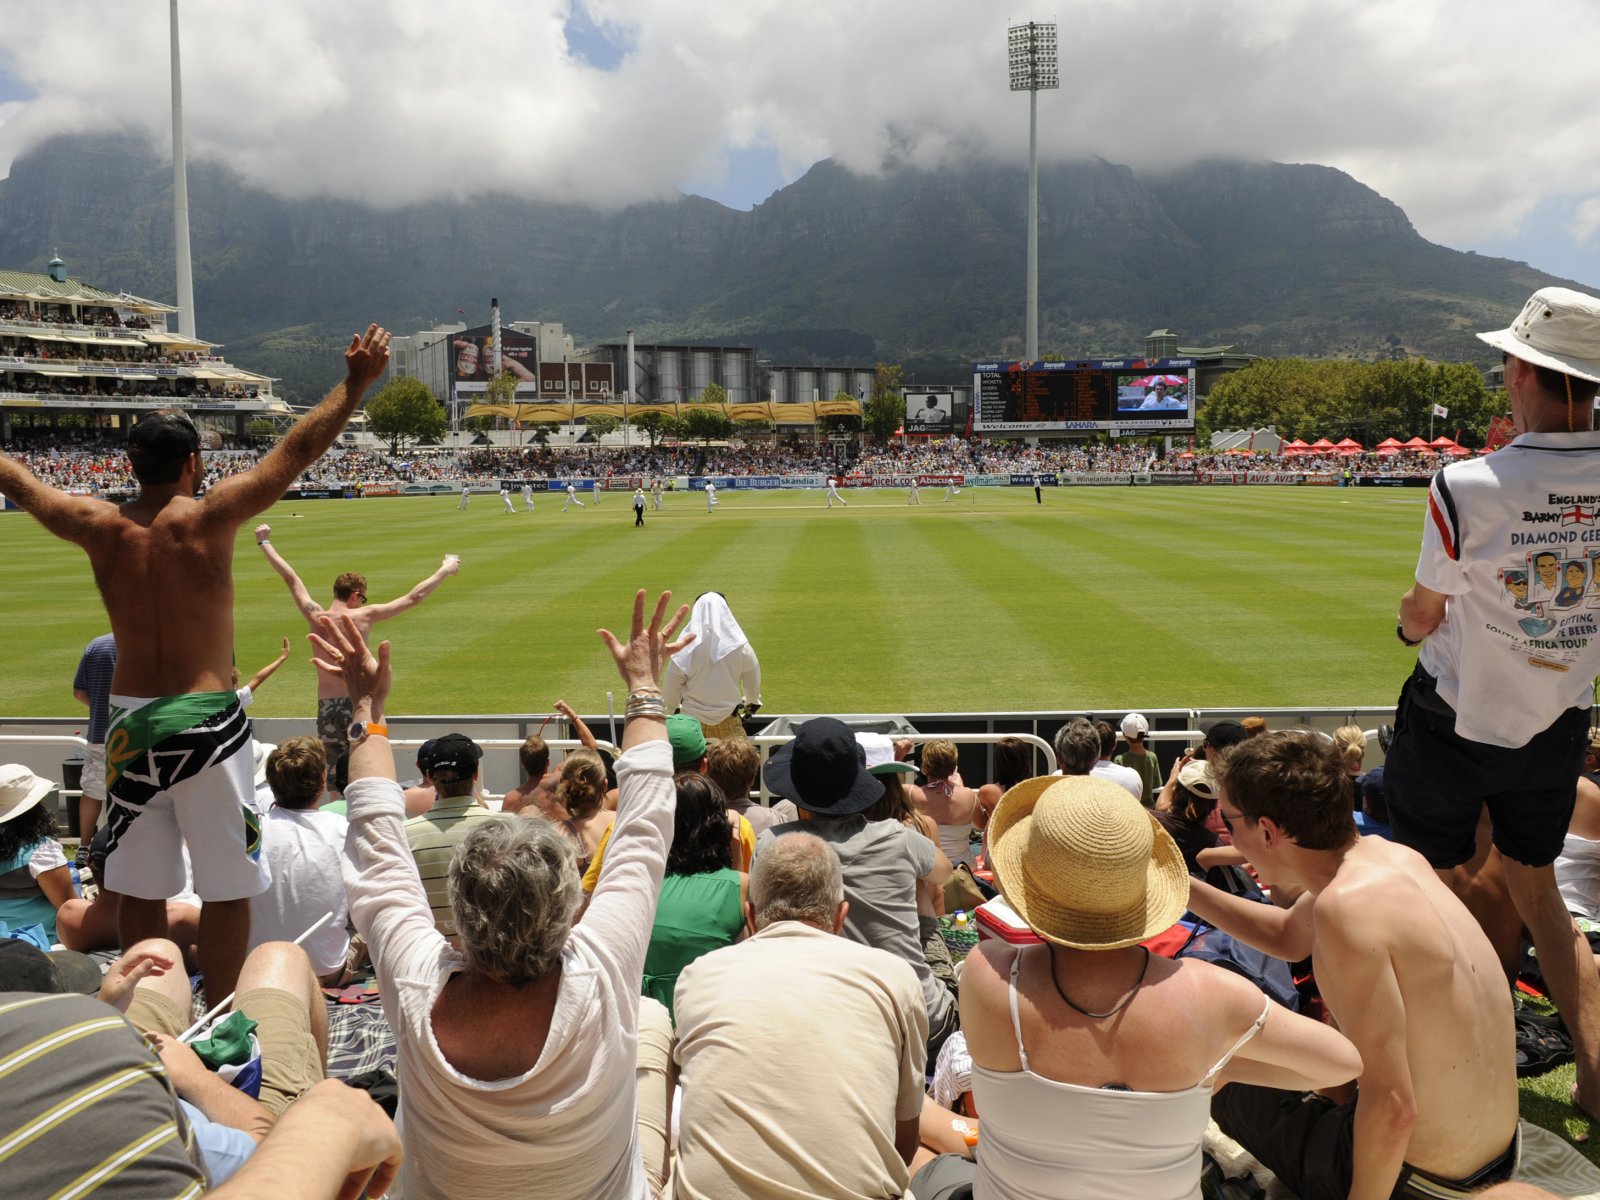 How to watch a cricket game on a beautiful cricket ground in Cape Town